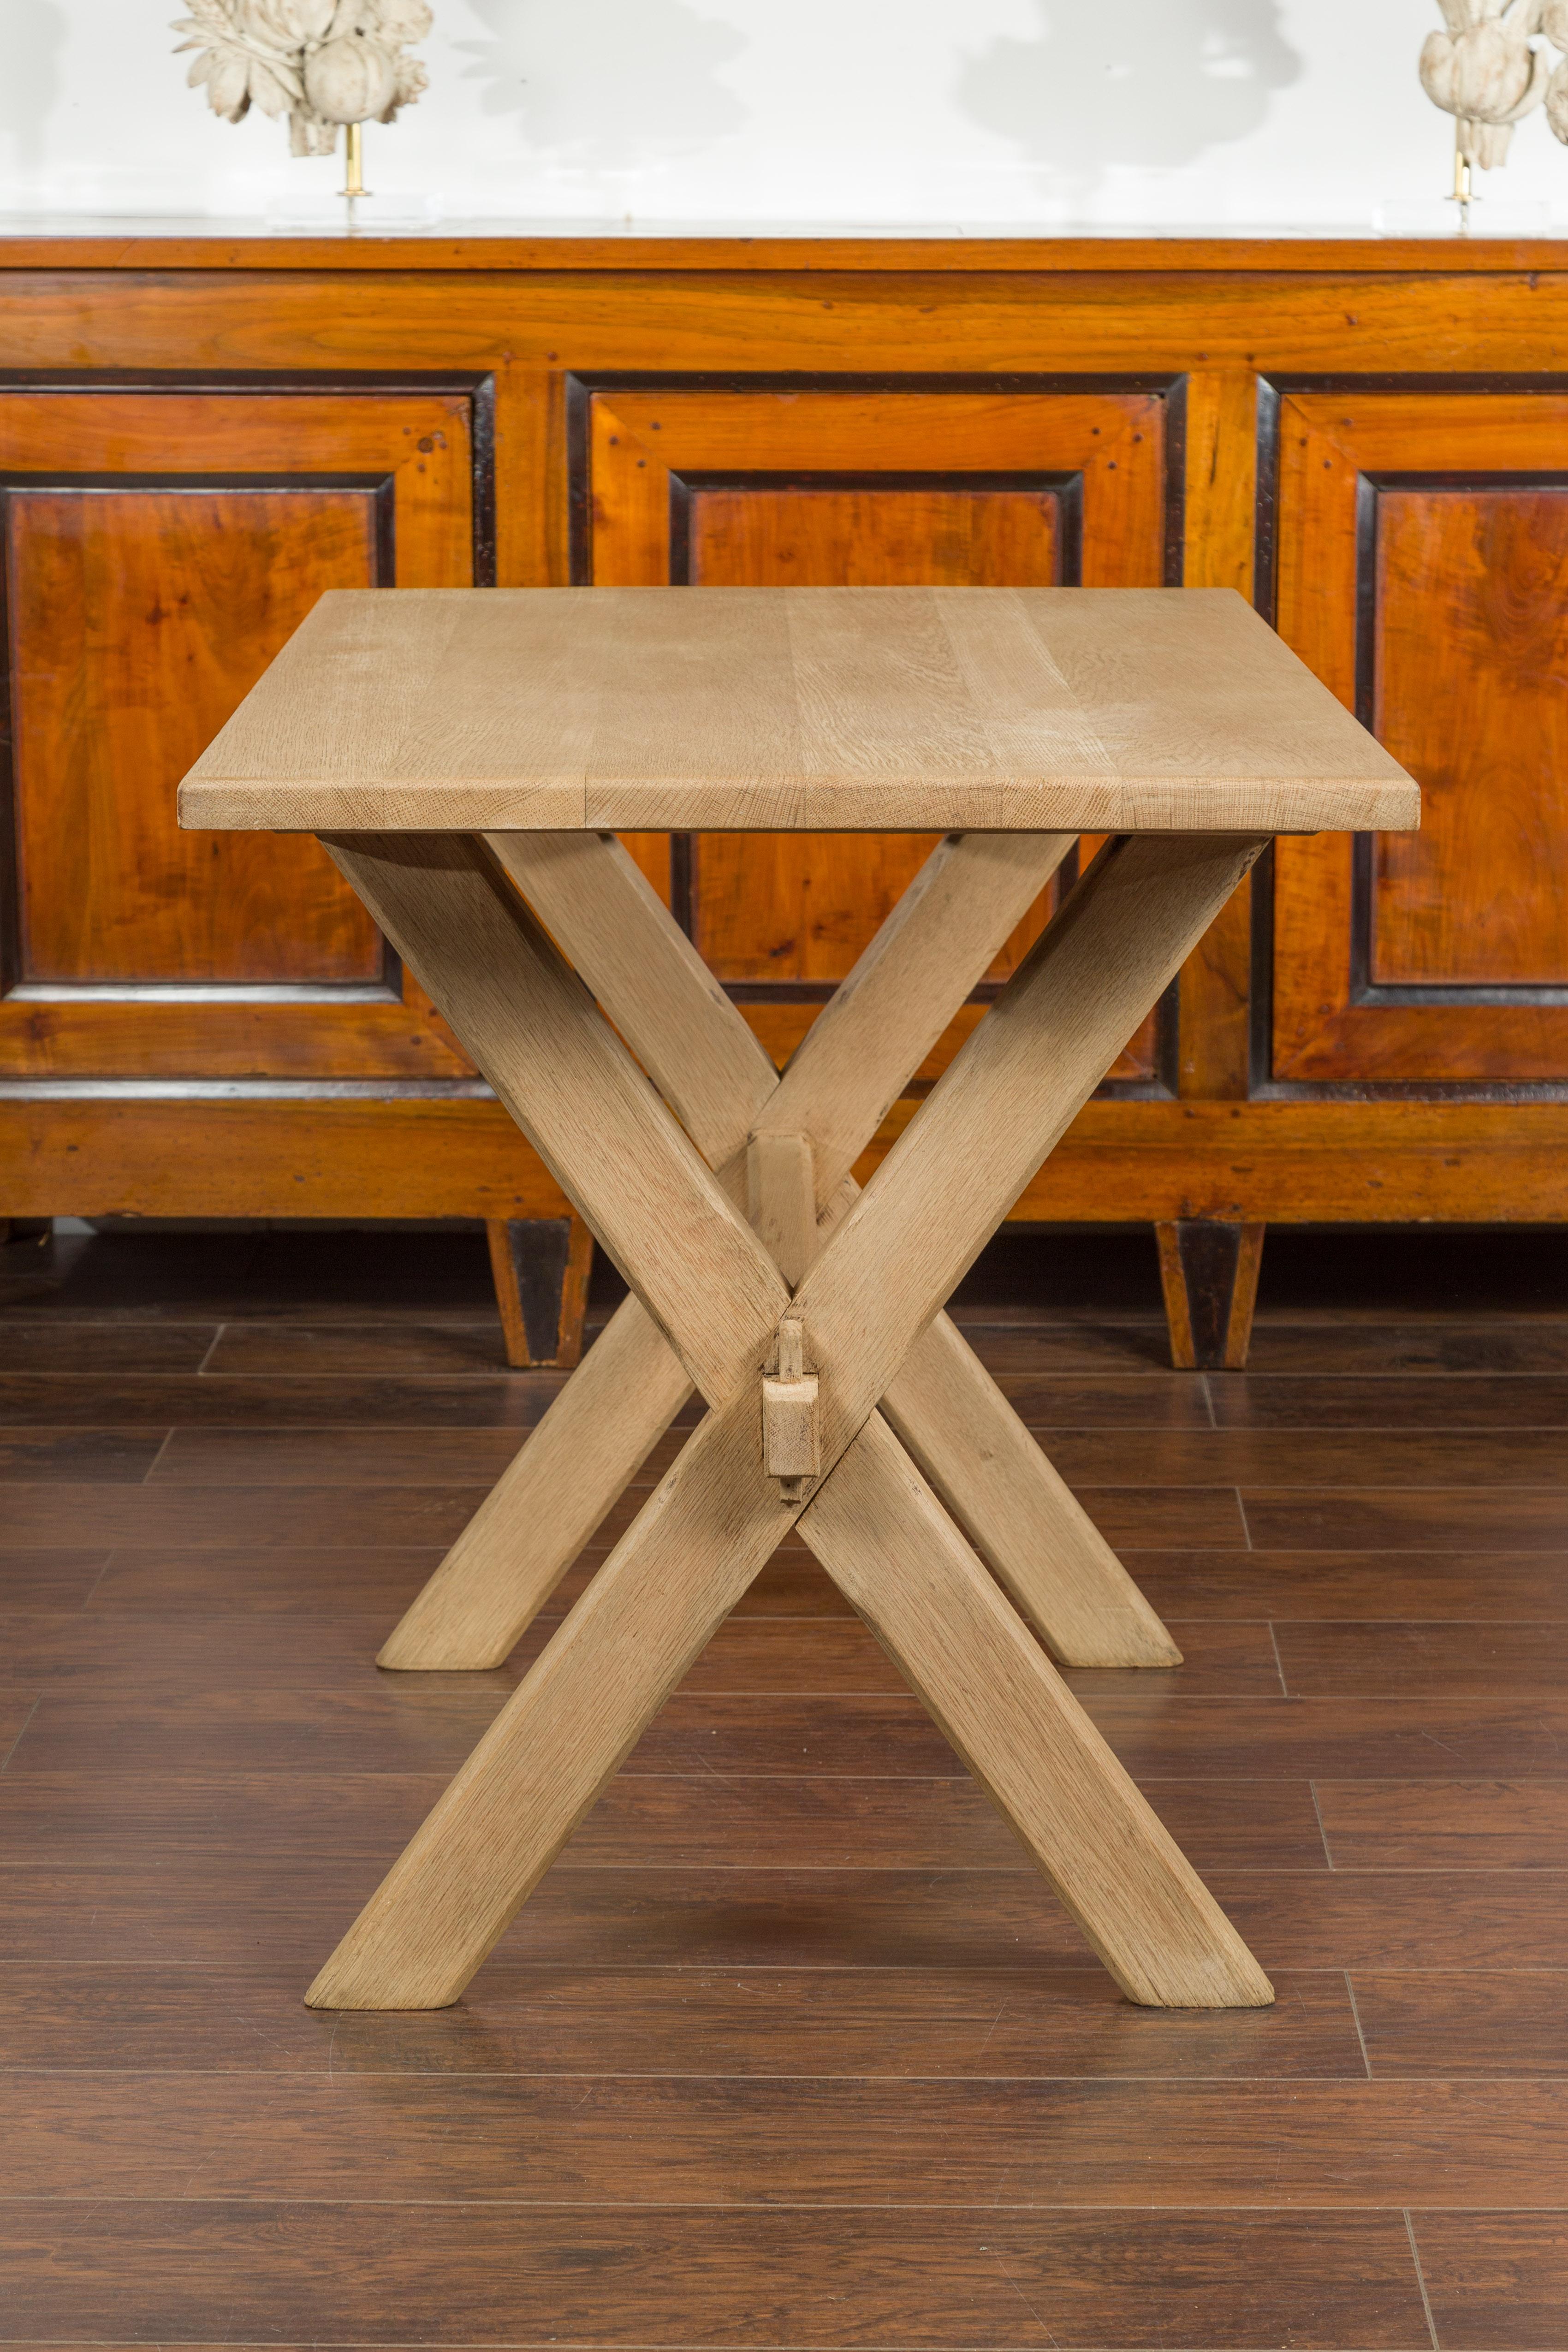 English Turn of the Century Oak Sawbuck Table with X-Form Base, circa 1900 For Sale 5